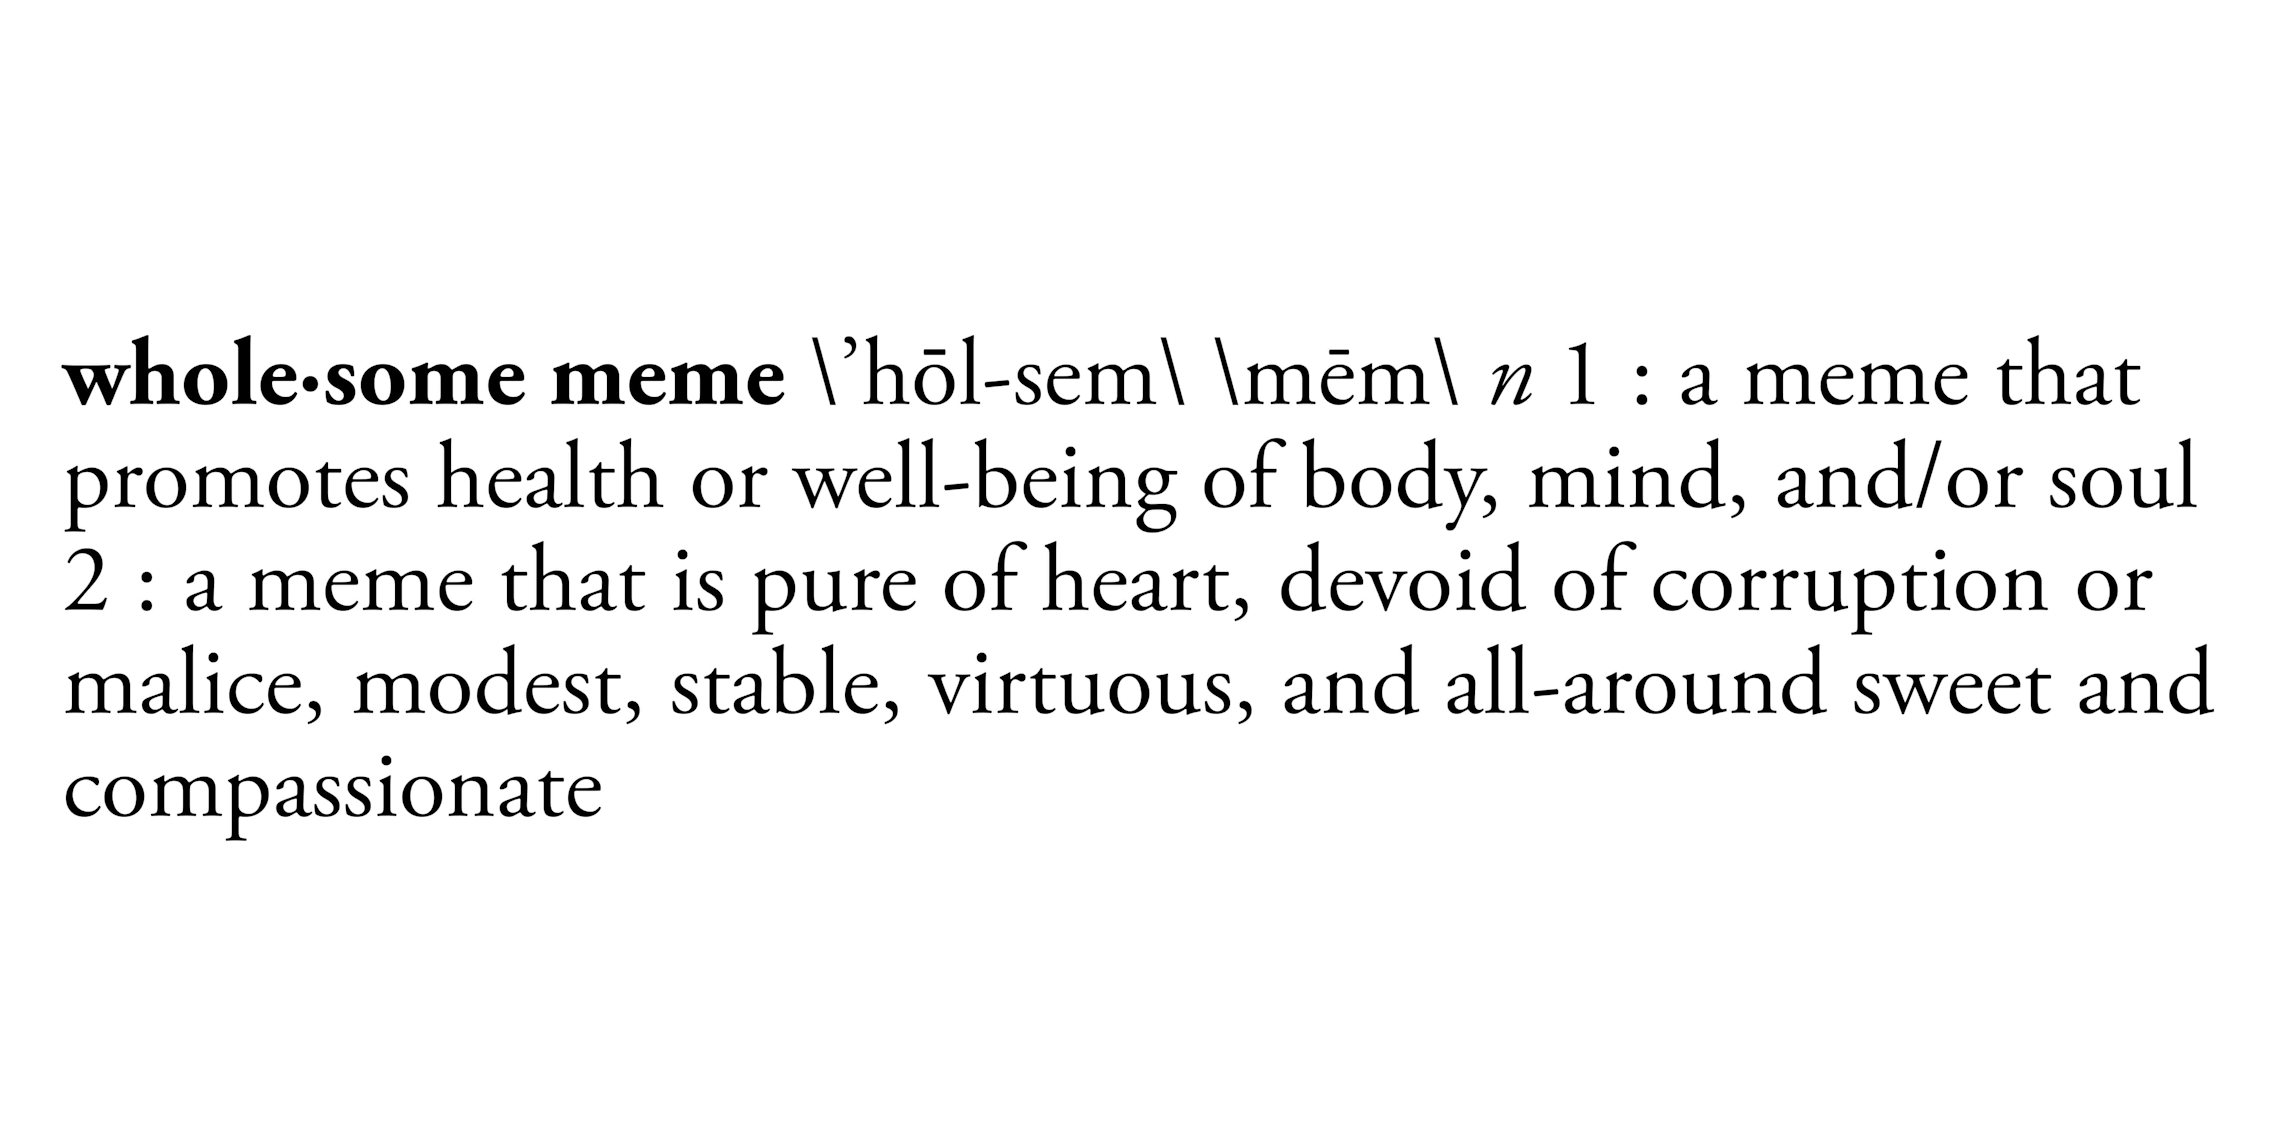 Wholesome meme dictionary definition